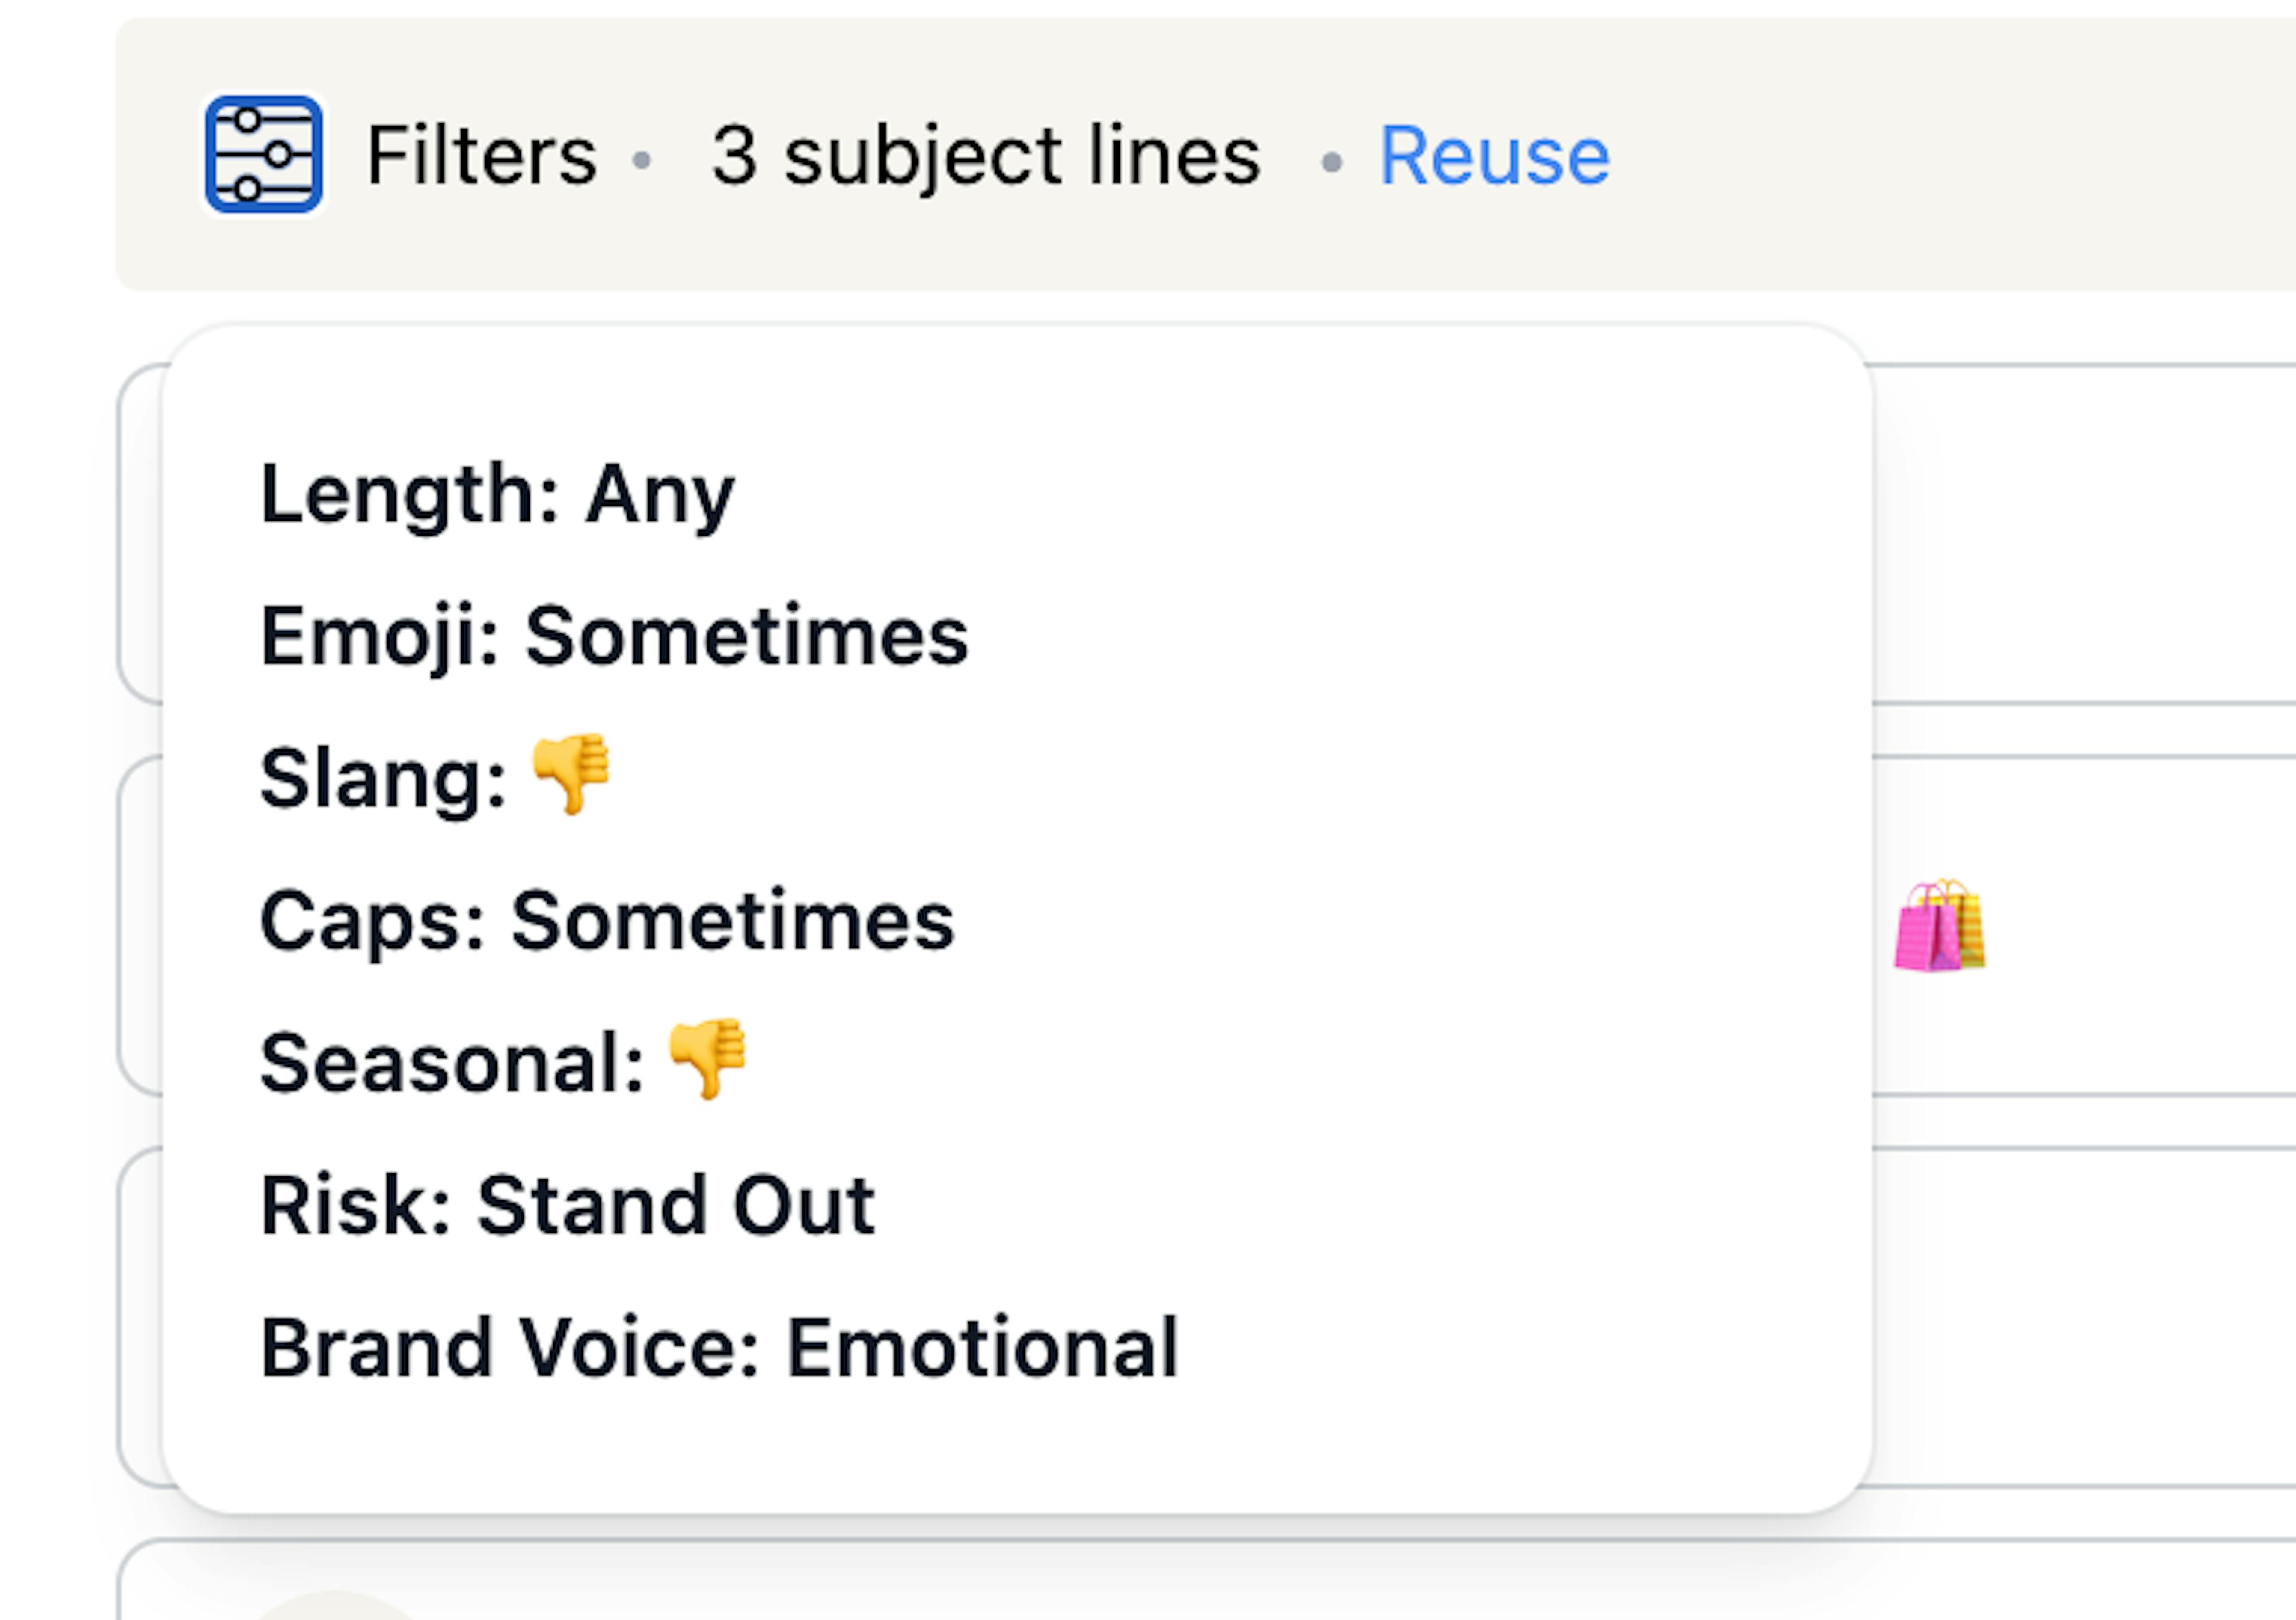 Historic filters allow users to access their winning combinations for subject lines.